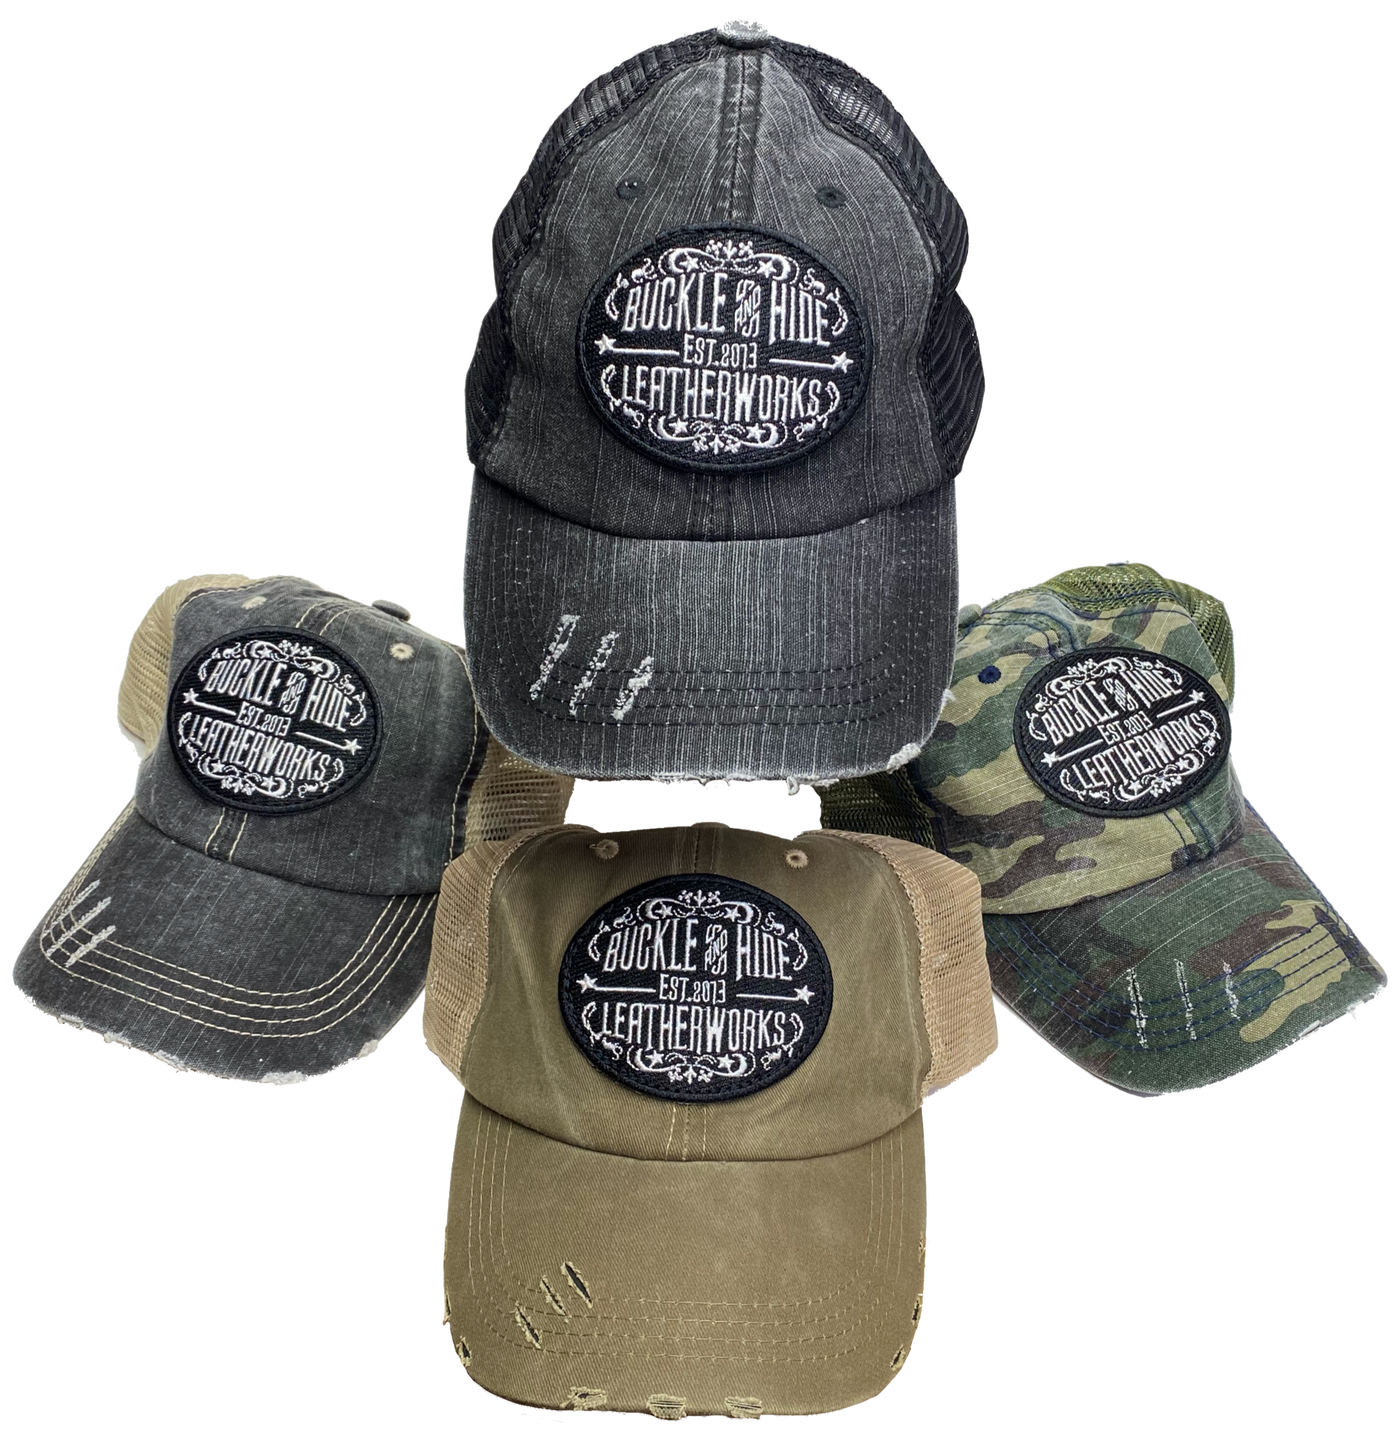 Official Buckle and Hide merchandise for your favorite leather shop just outside Nashville in Smyrna, TN Classic style cap with Buckle and Hide patch sewn on the front Mesh back Snap Back Soft unstructured top Distressed look, available in several colors